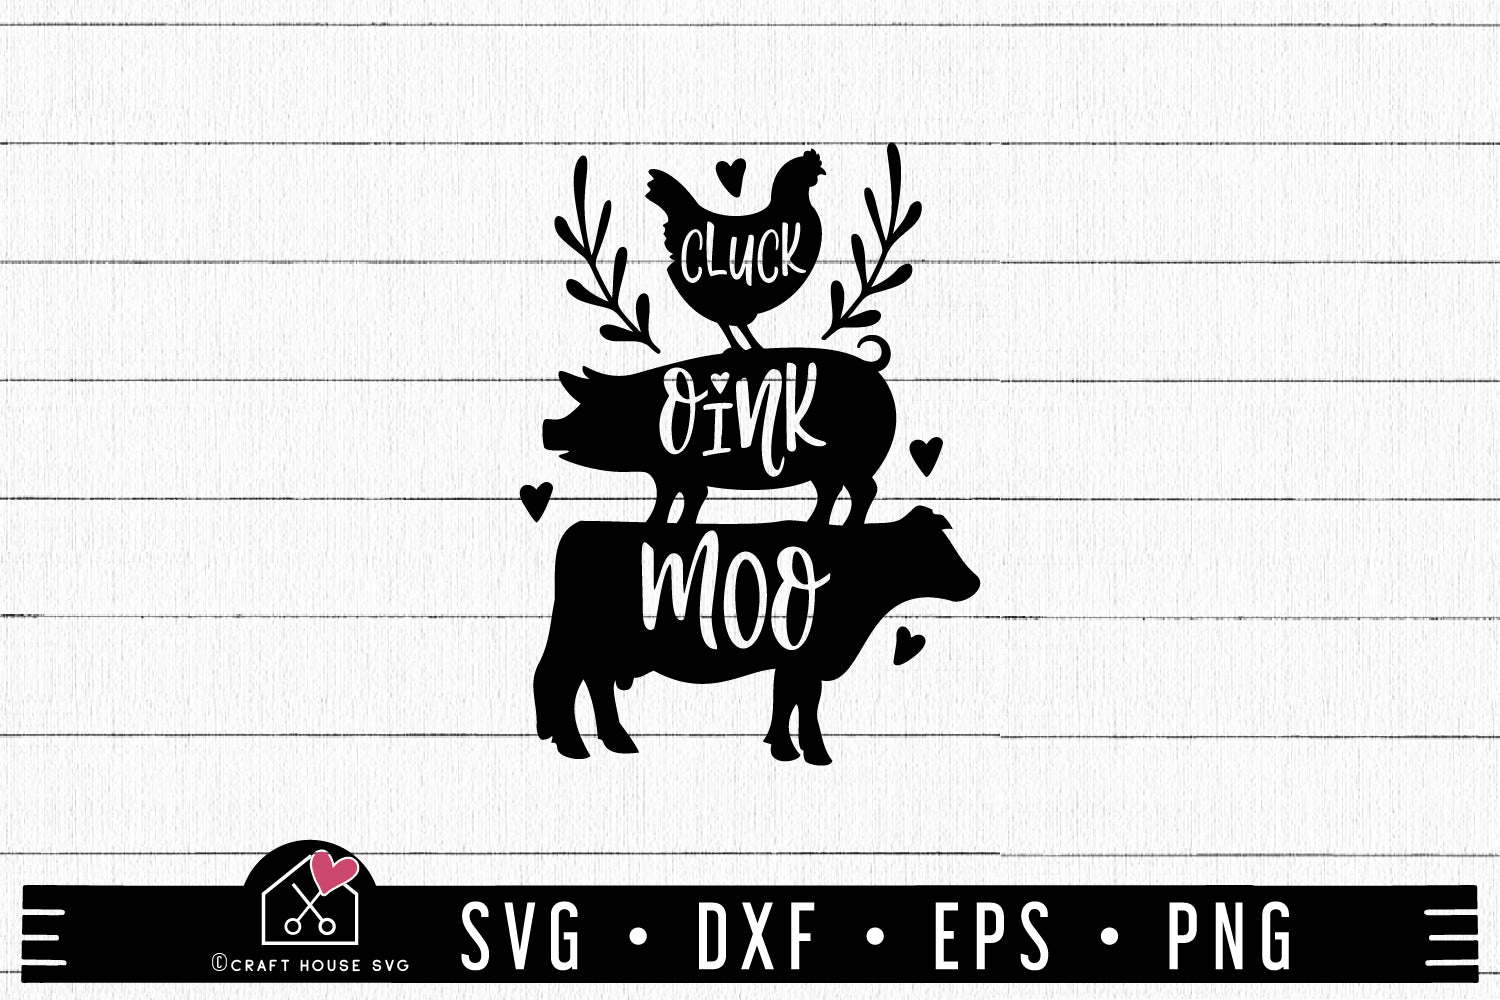 Cluck Oink Moo SVG file | Farmhouse Kitchen Cut File